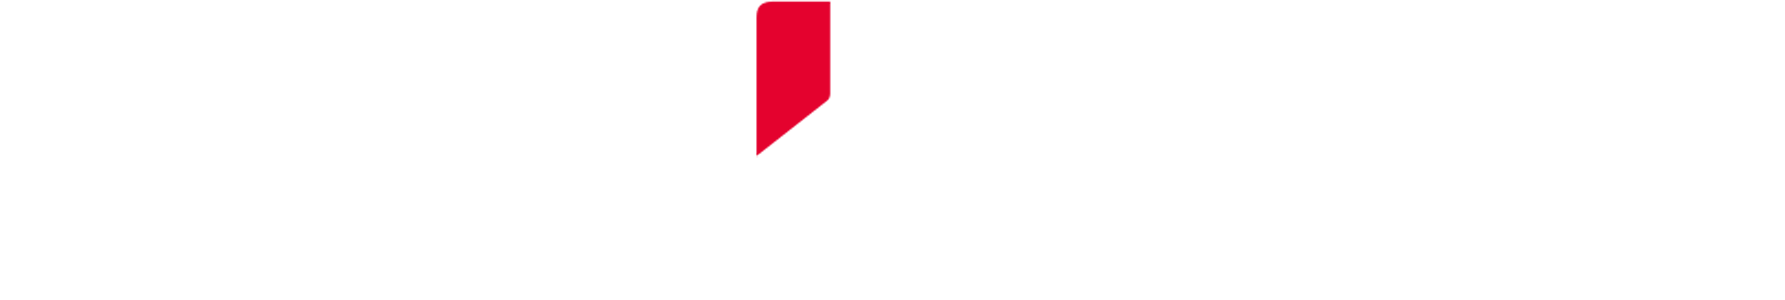 Fujifilm+logo+white+and+red.png